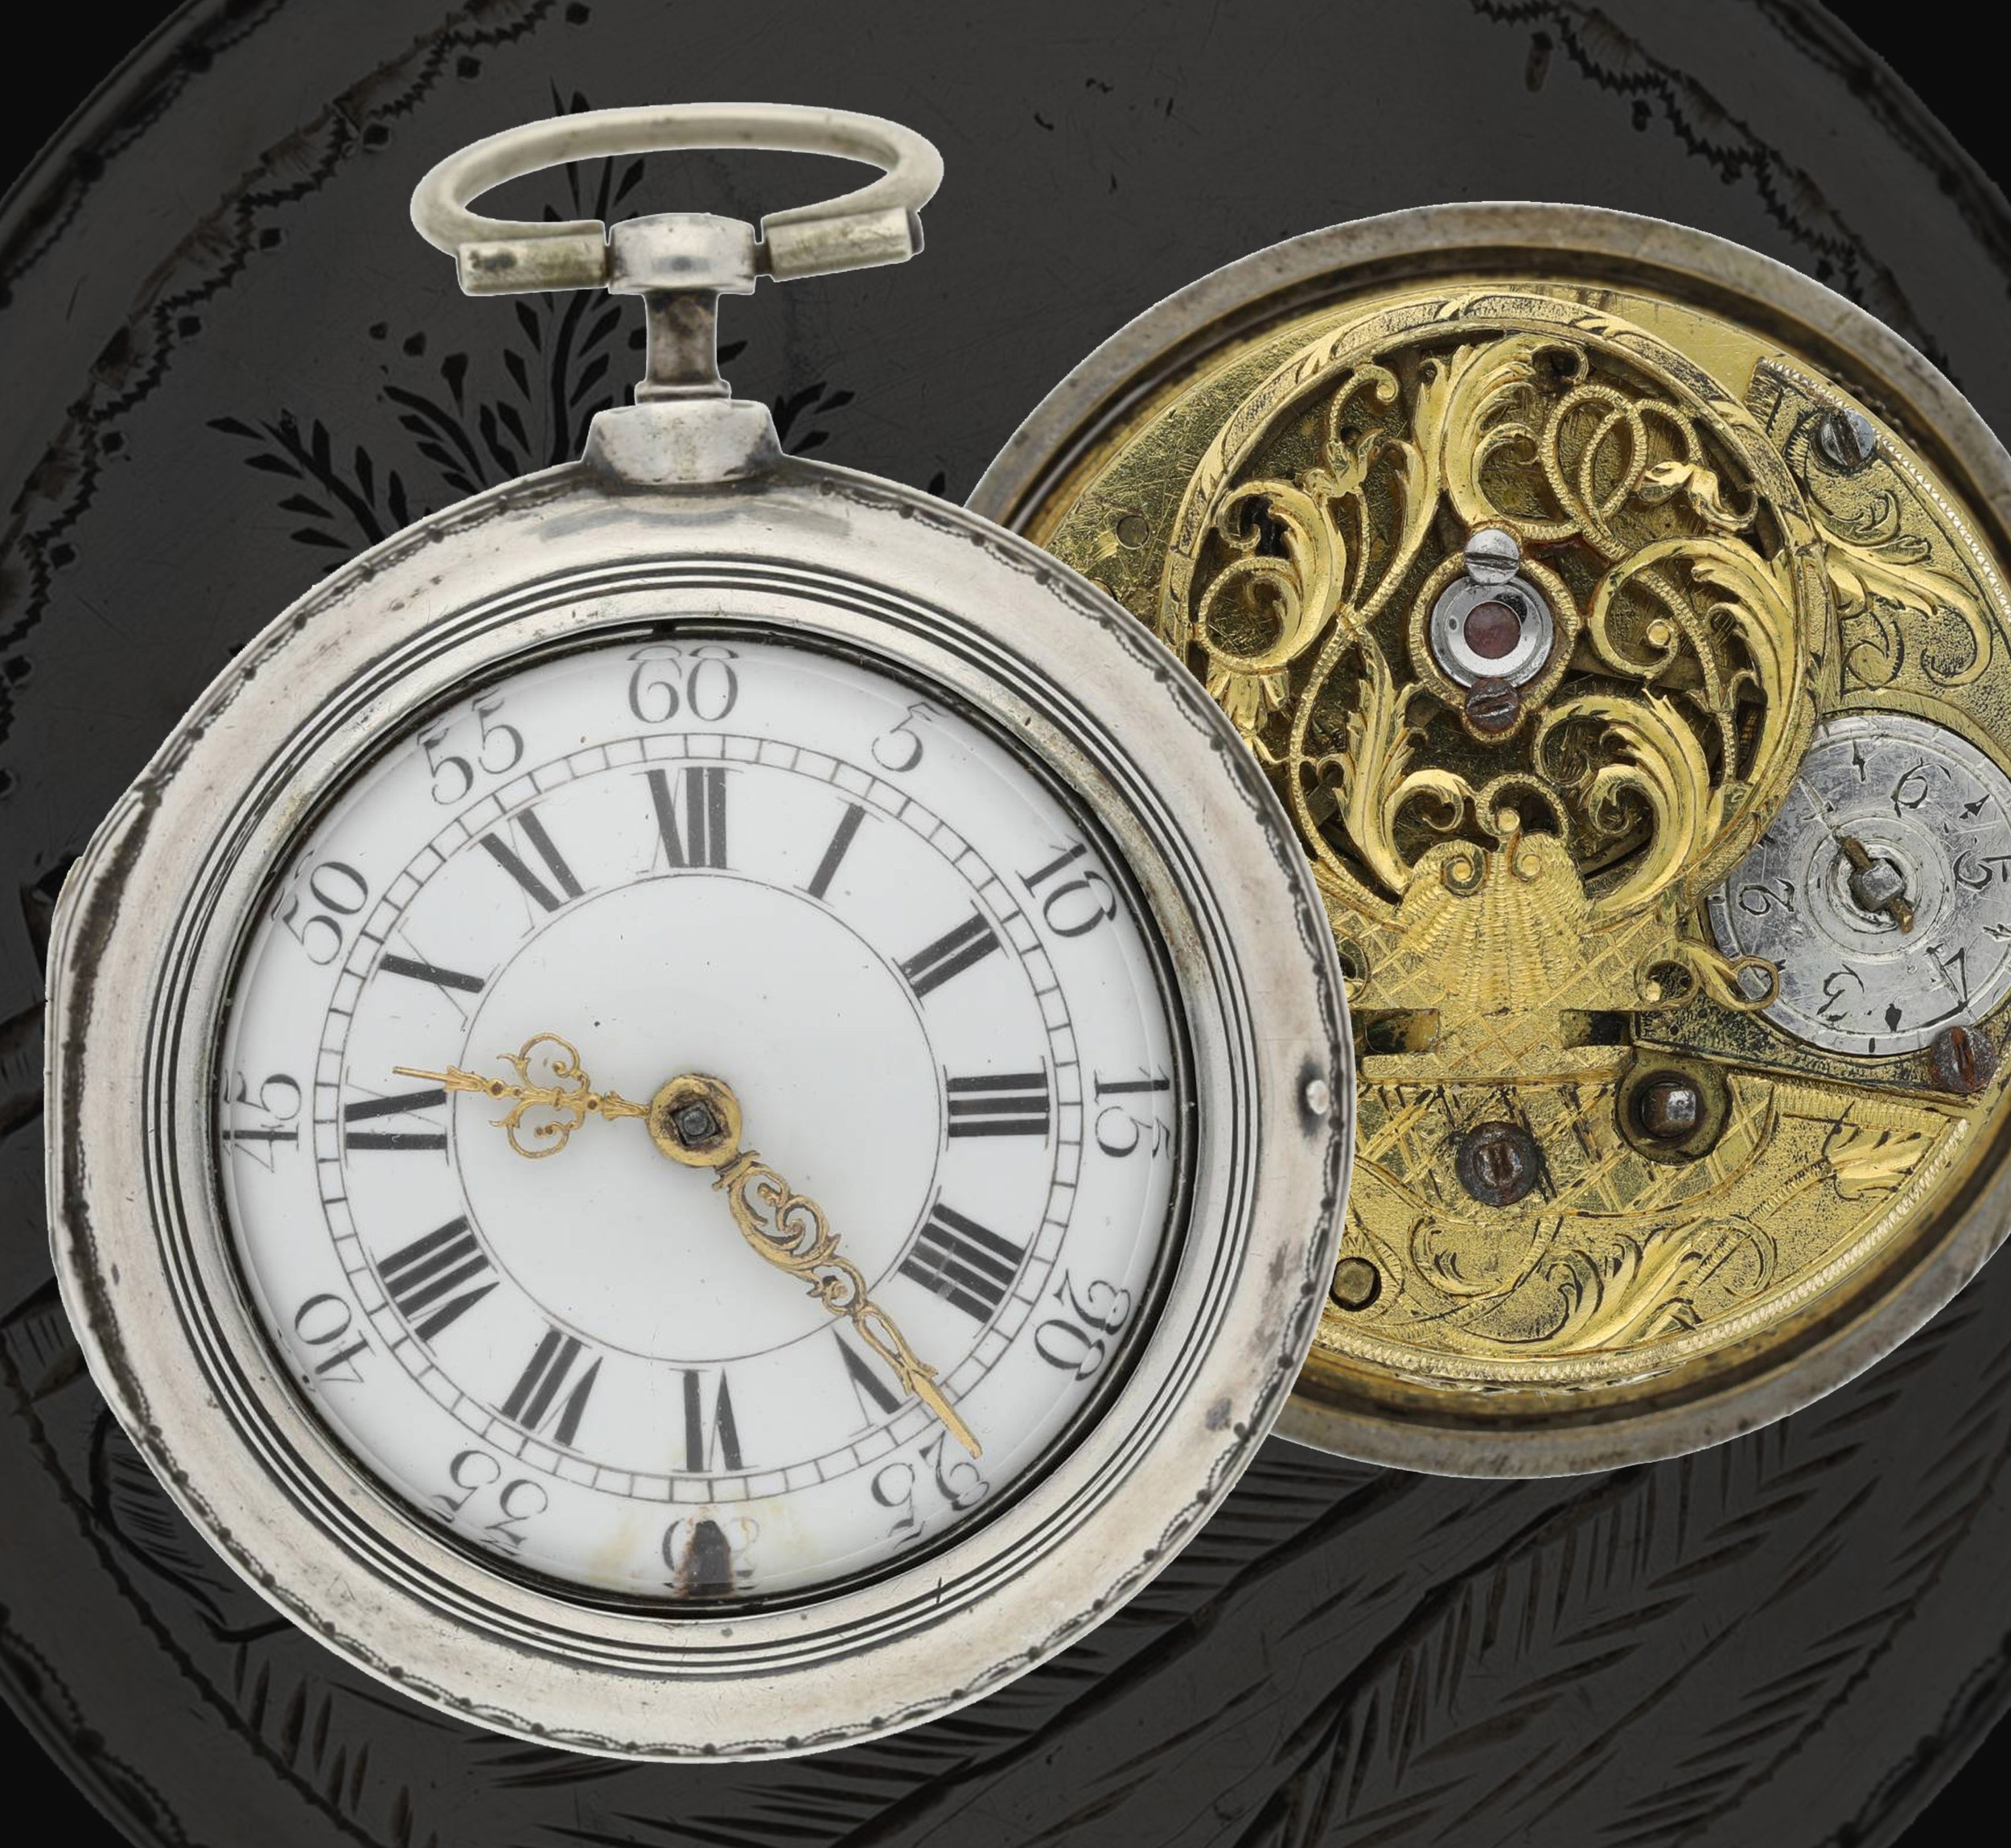 Tomson, London - English 18th century silver pair cased verge pocket watch, signed fusee movement,